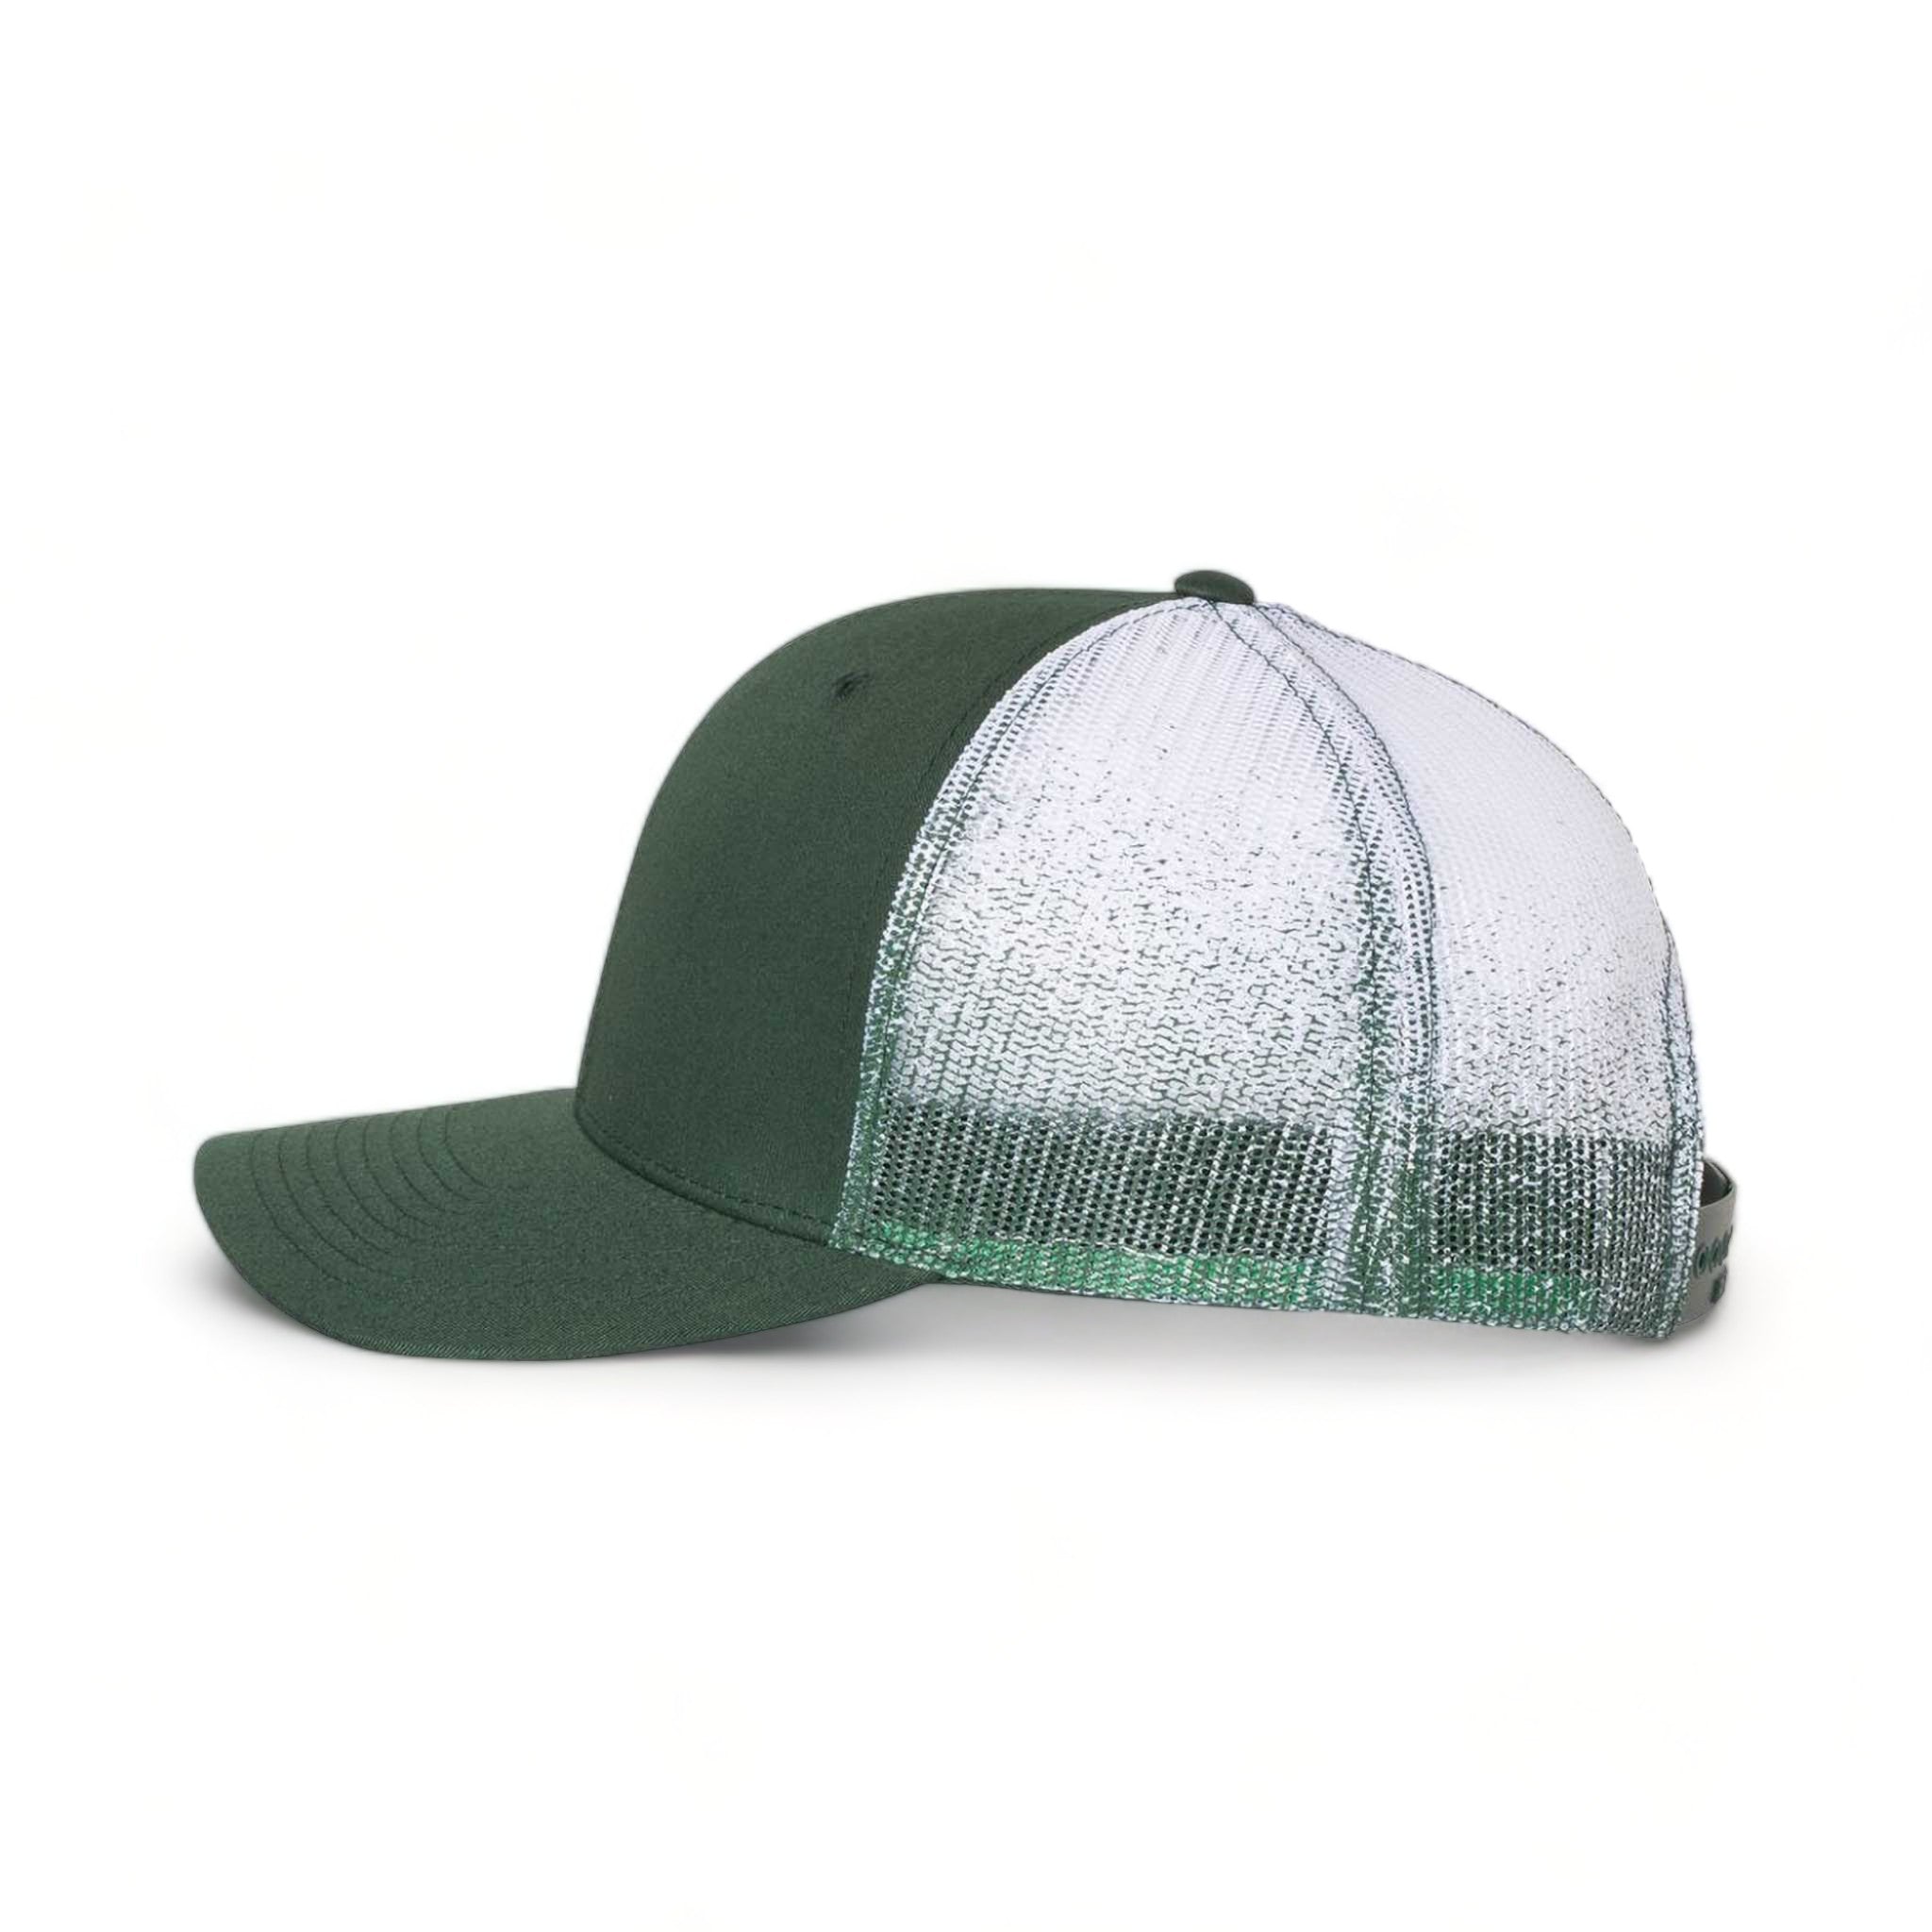 Side view of Richardson 112PM custom hat in dark green and dark green to white fade